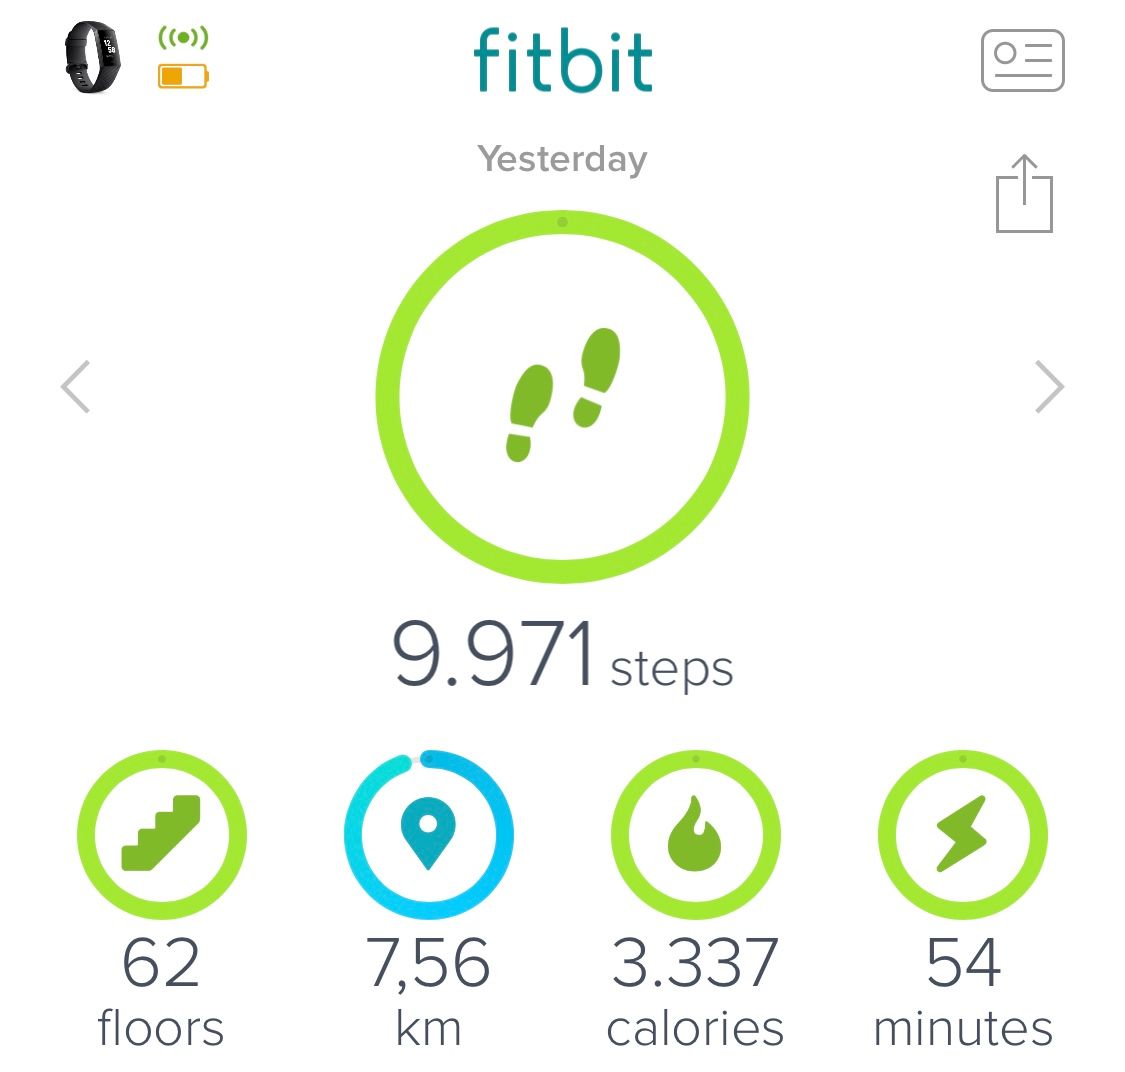 fitbit miscalculating steps